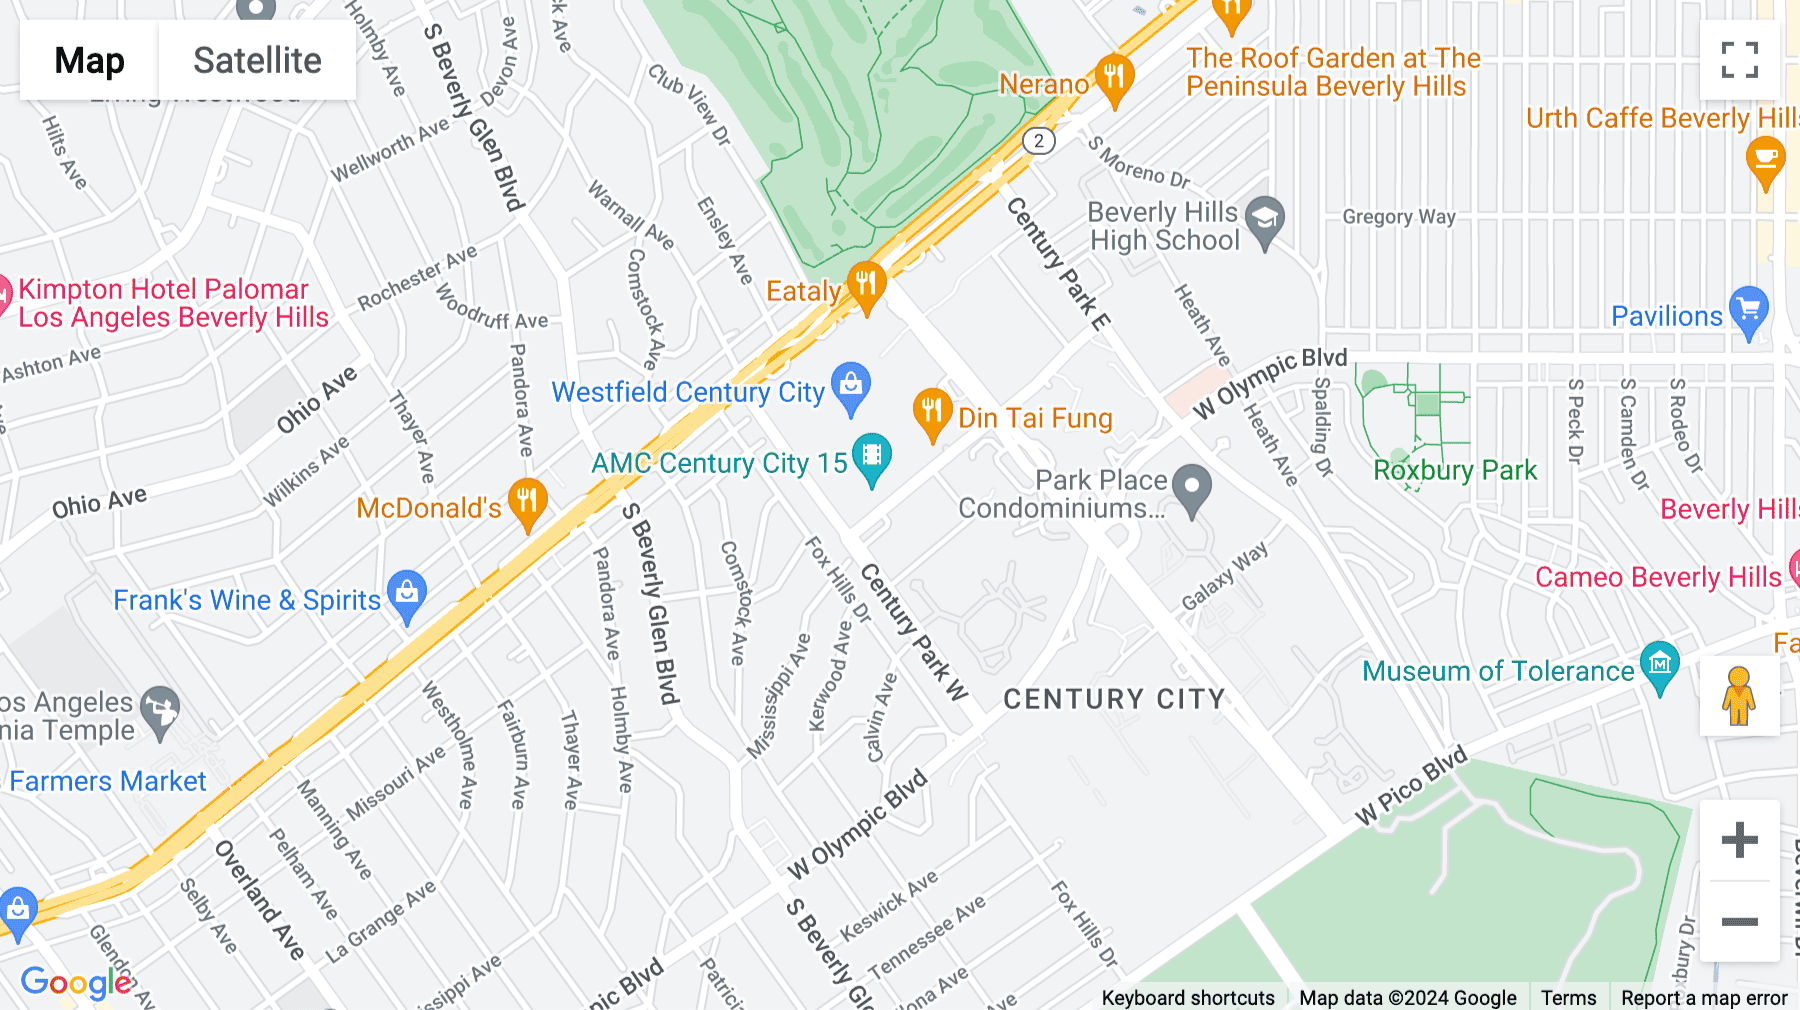 Click for interative map of 10250 Constellation Blvd, Los Angeles